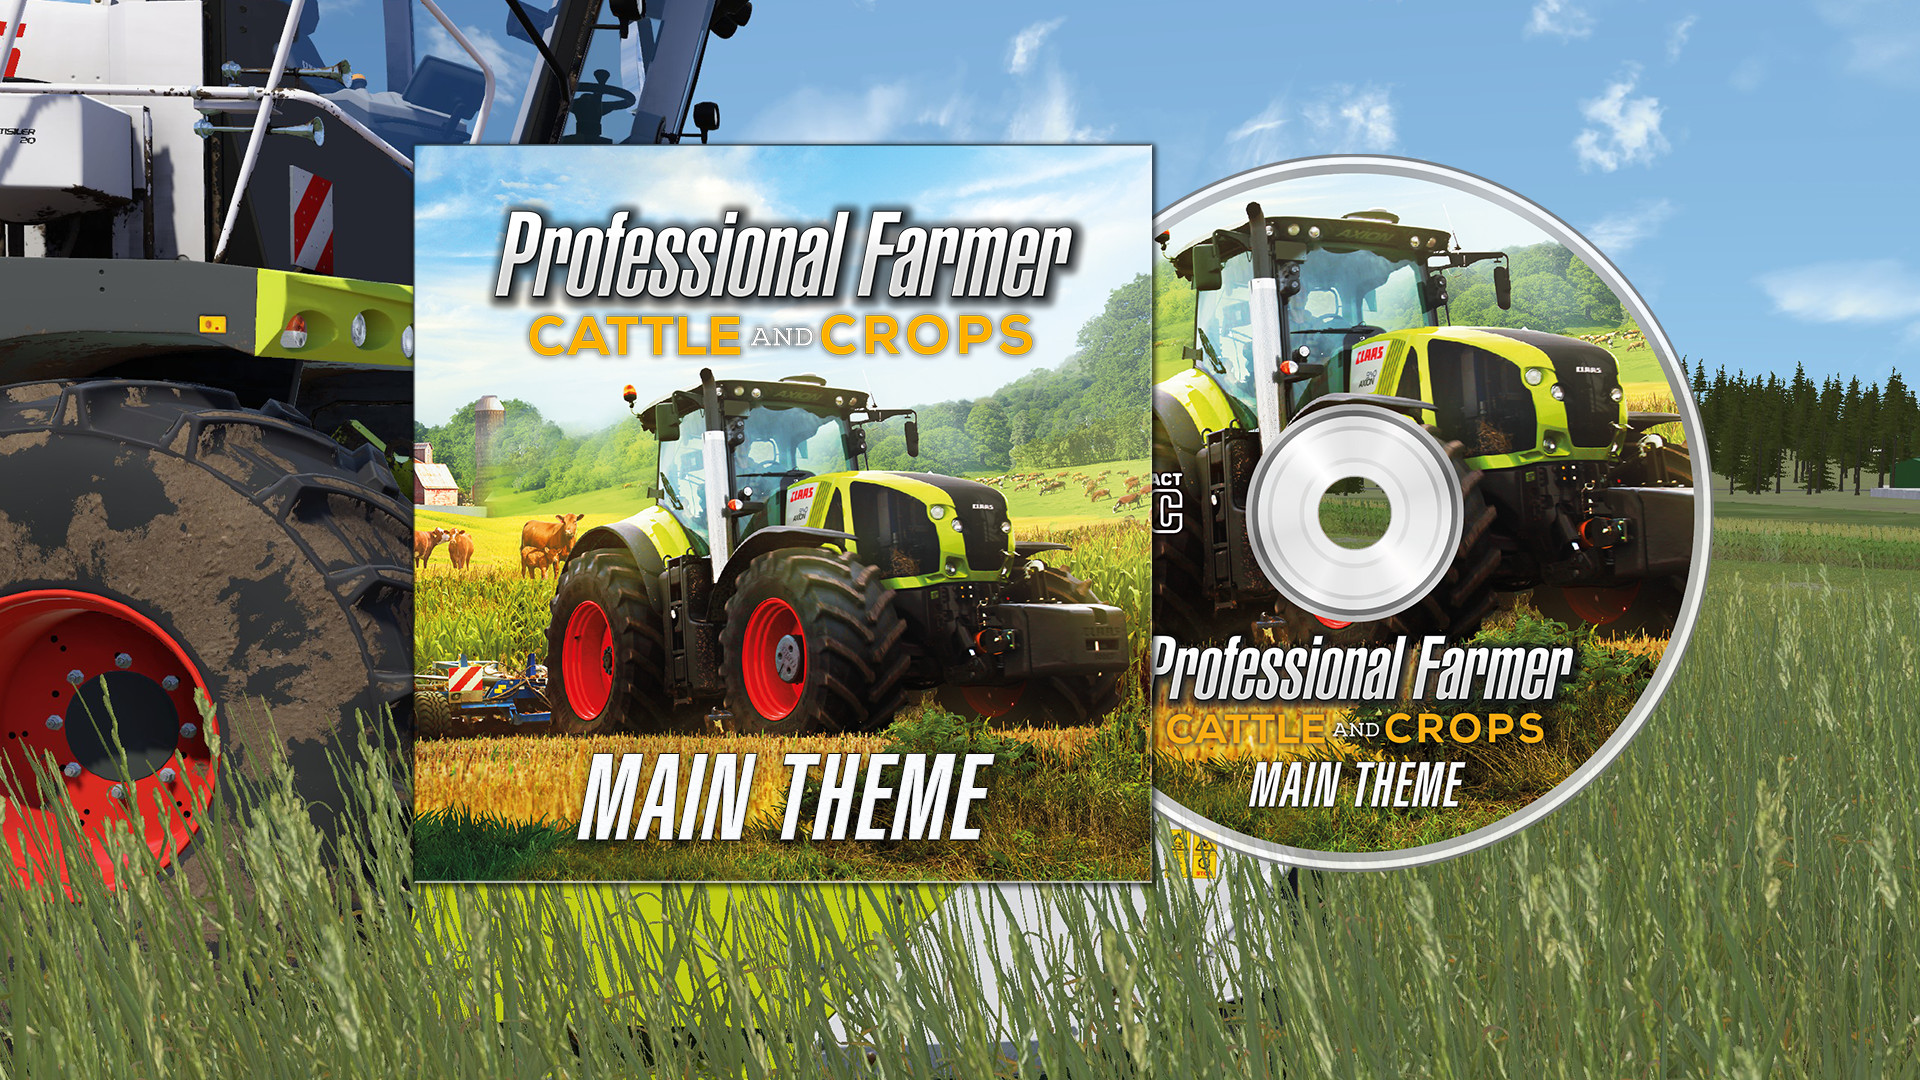 Professional Farmer: Cattle and Crops - Digital Supporter Pack Featured Screenshot #1